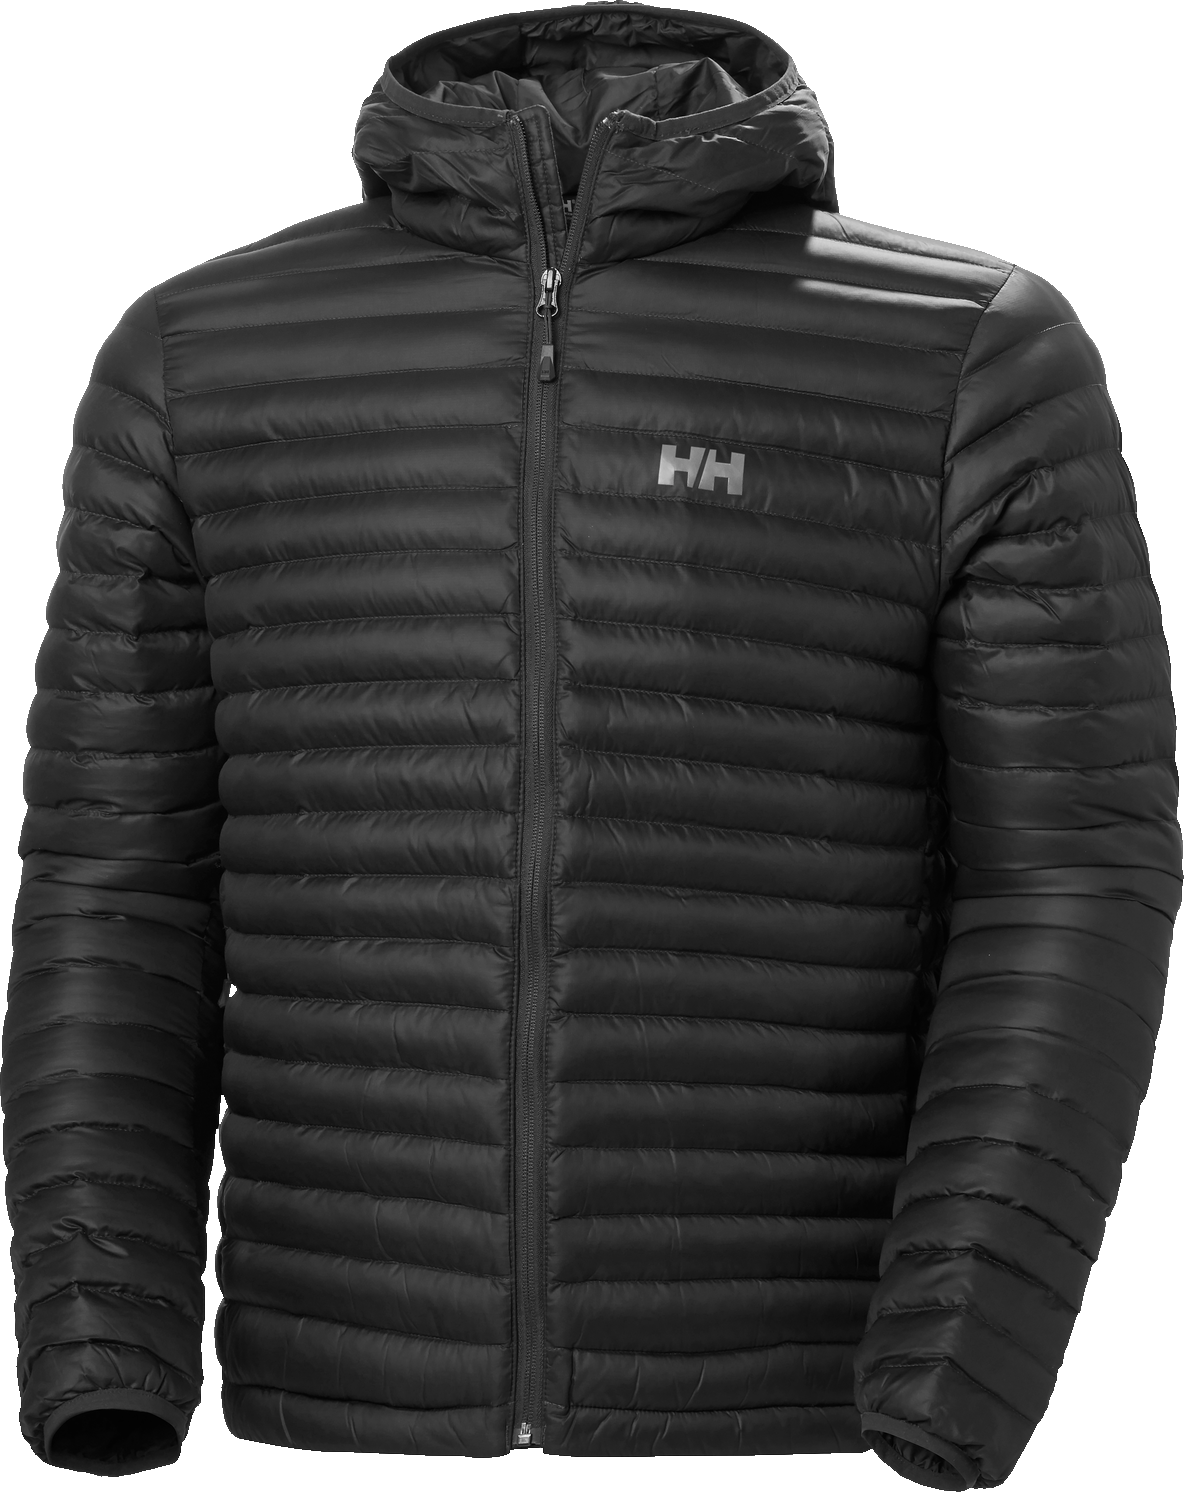 Men’s Sirdal Hooded Insulated Jacket Black